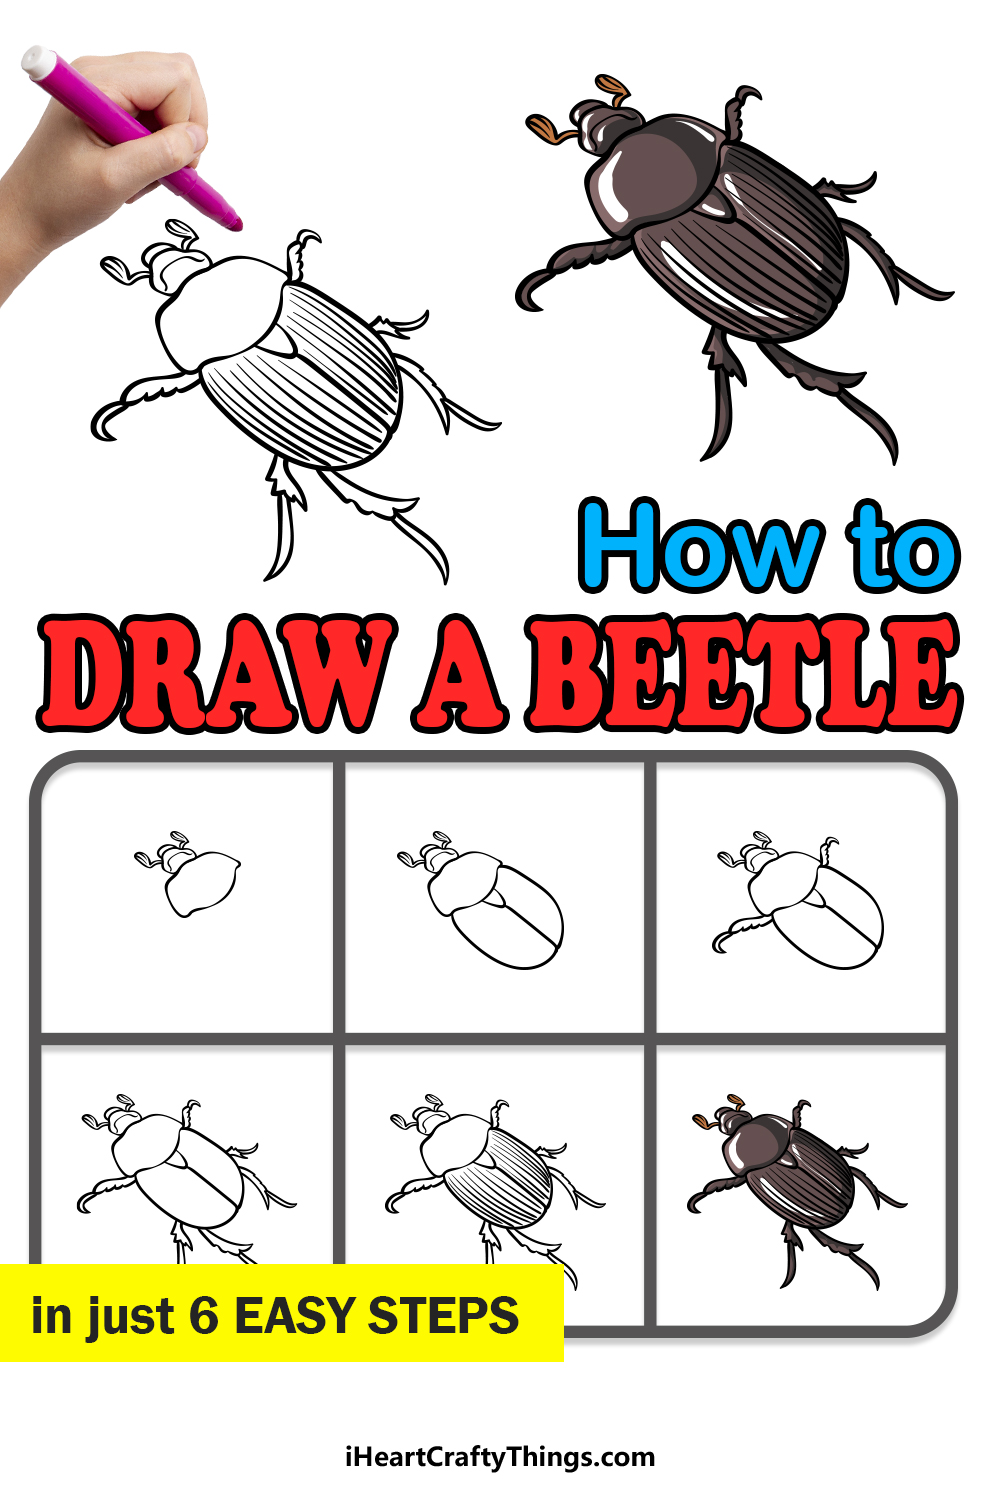 how to draw a Beetle in 6 easy steps